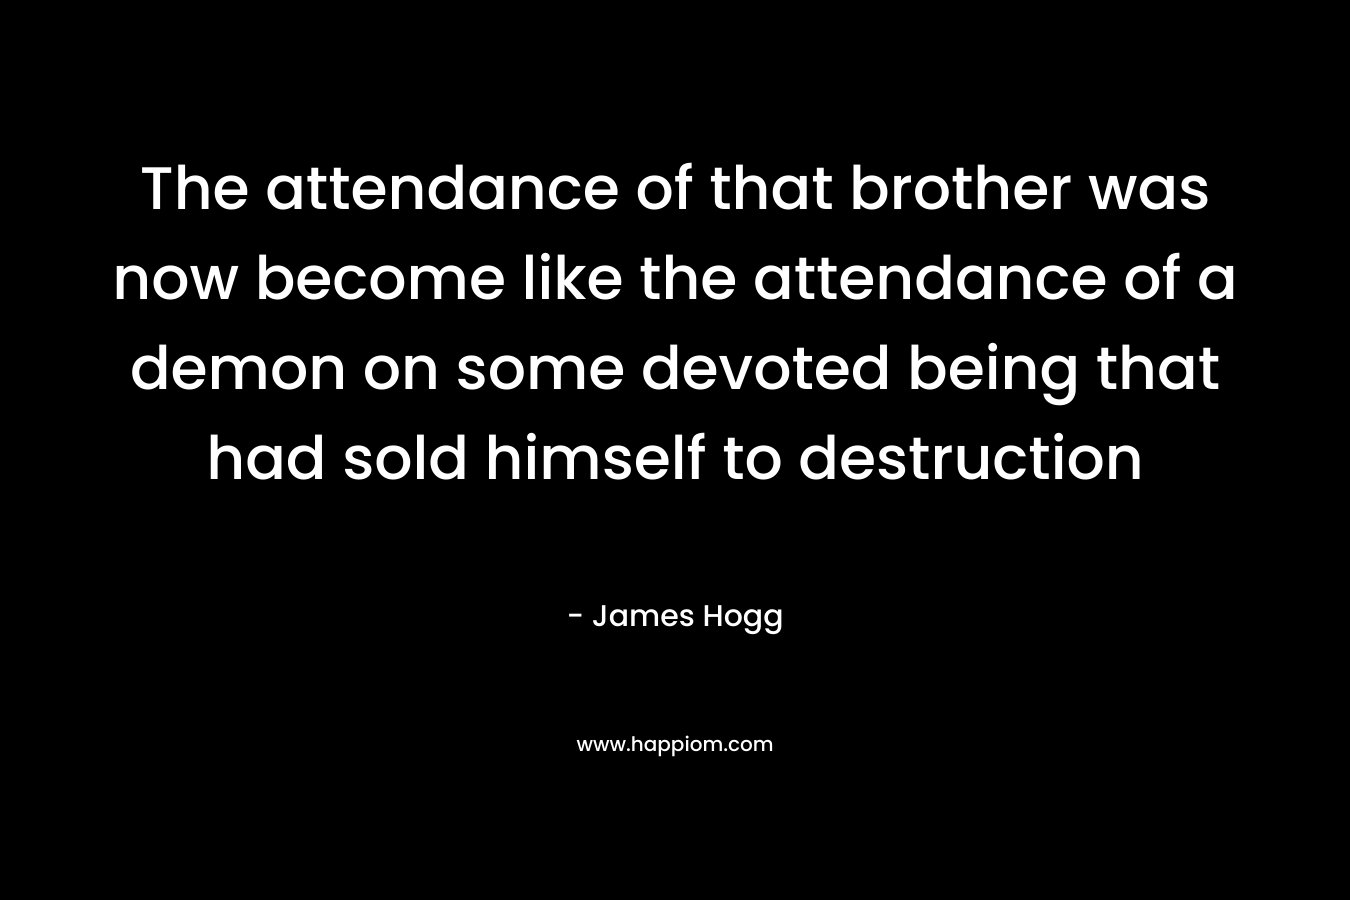 The attendance of that brother was now become like the attendance of a demon on some devoted being that had sold himself to destruction